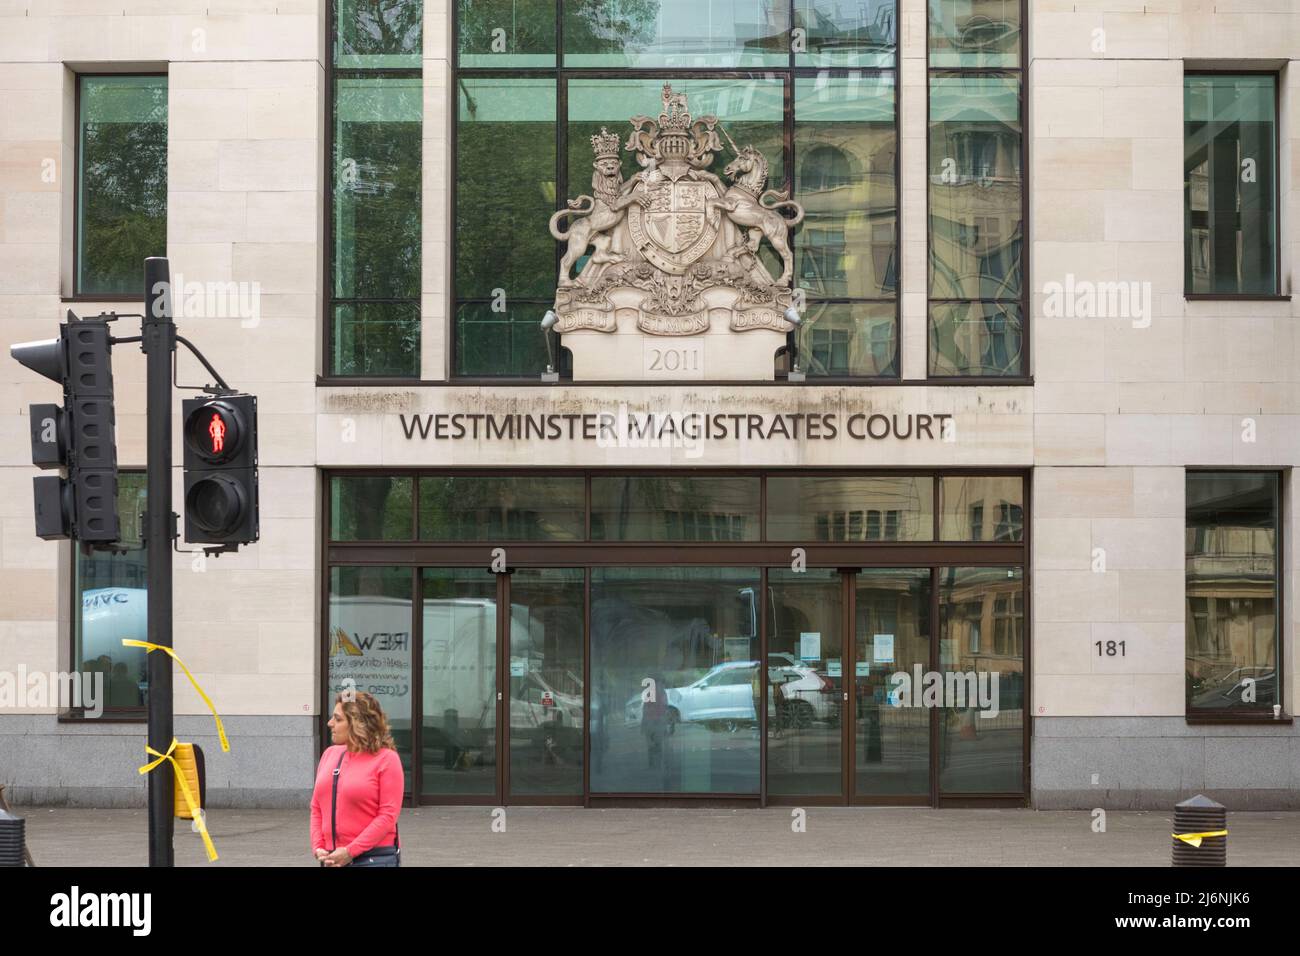 A general view of Westminster Magistrates Court, 181 Marylebone Rd, London NW1 5BR  Image shot on the 28th April 2022.  © Belinda Jiao   jiao.bilin@gm Stock Photo